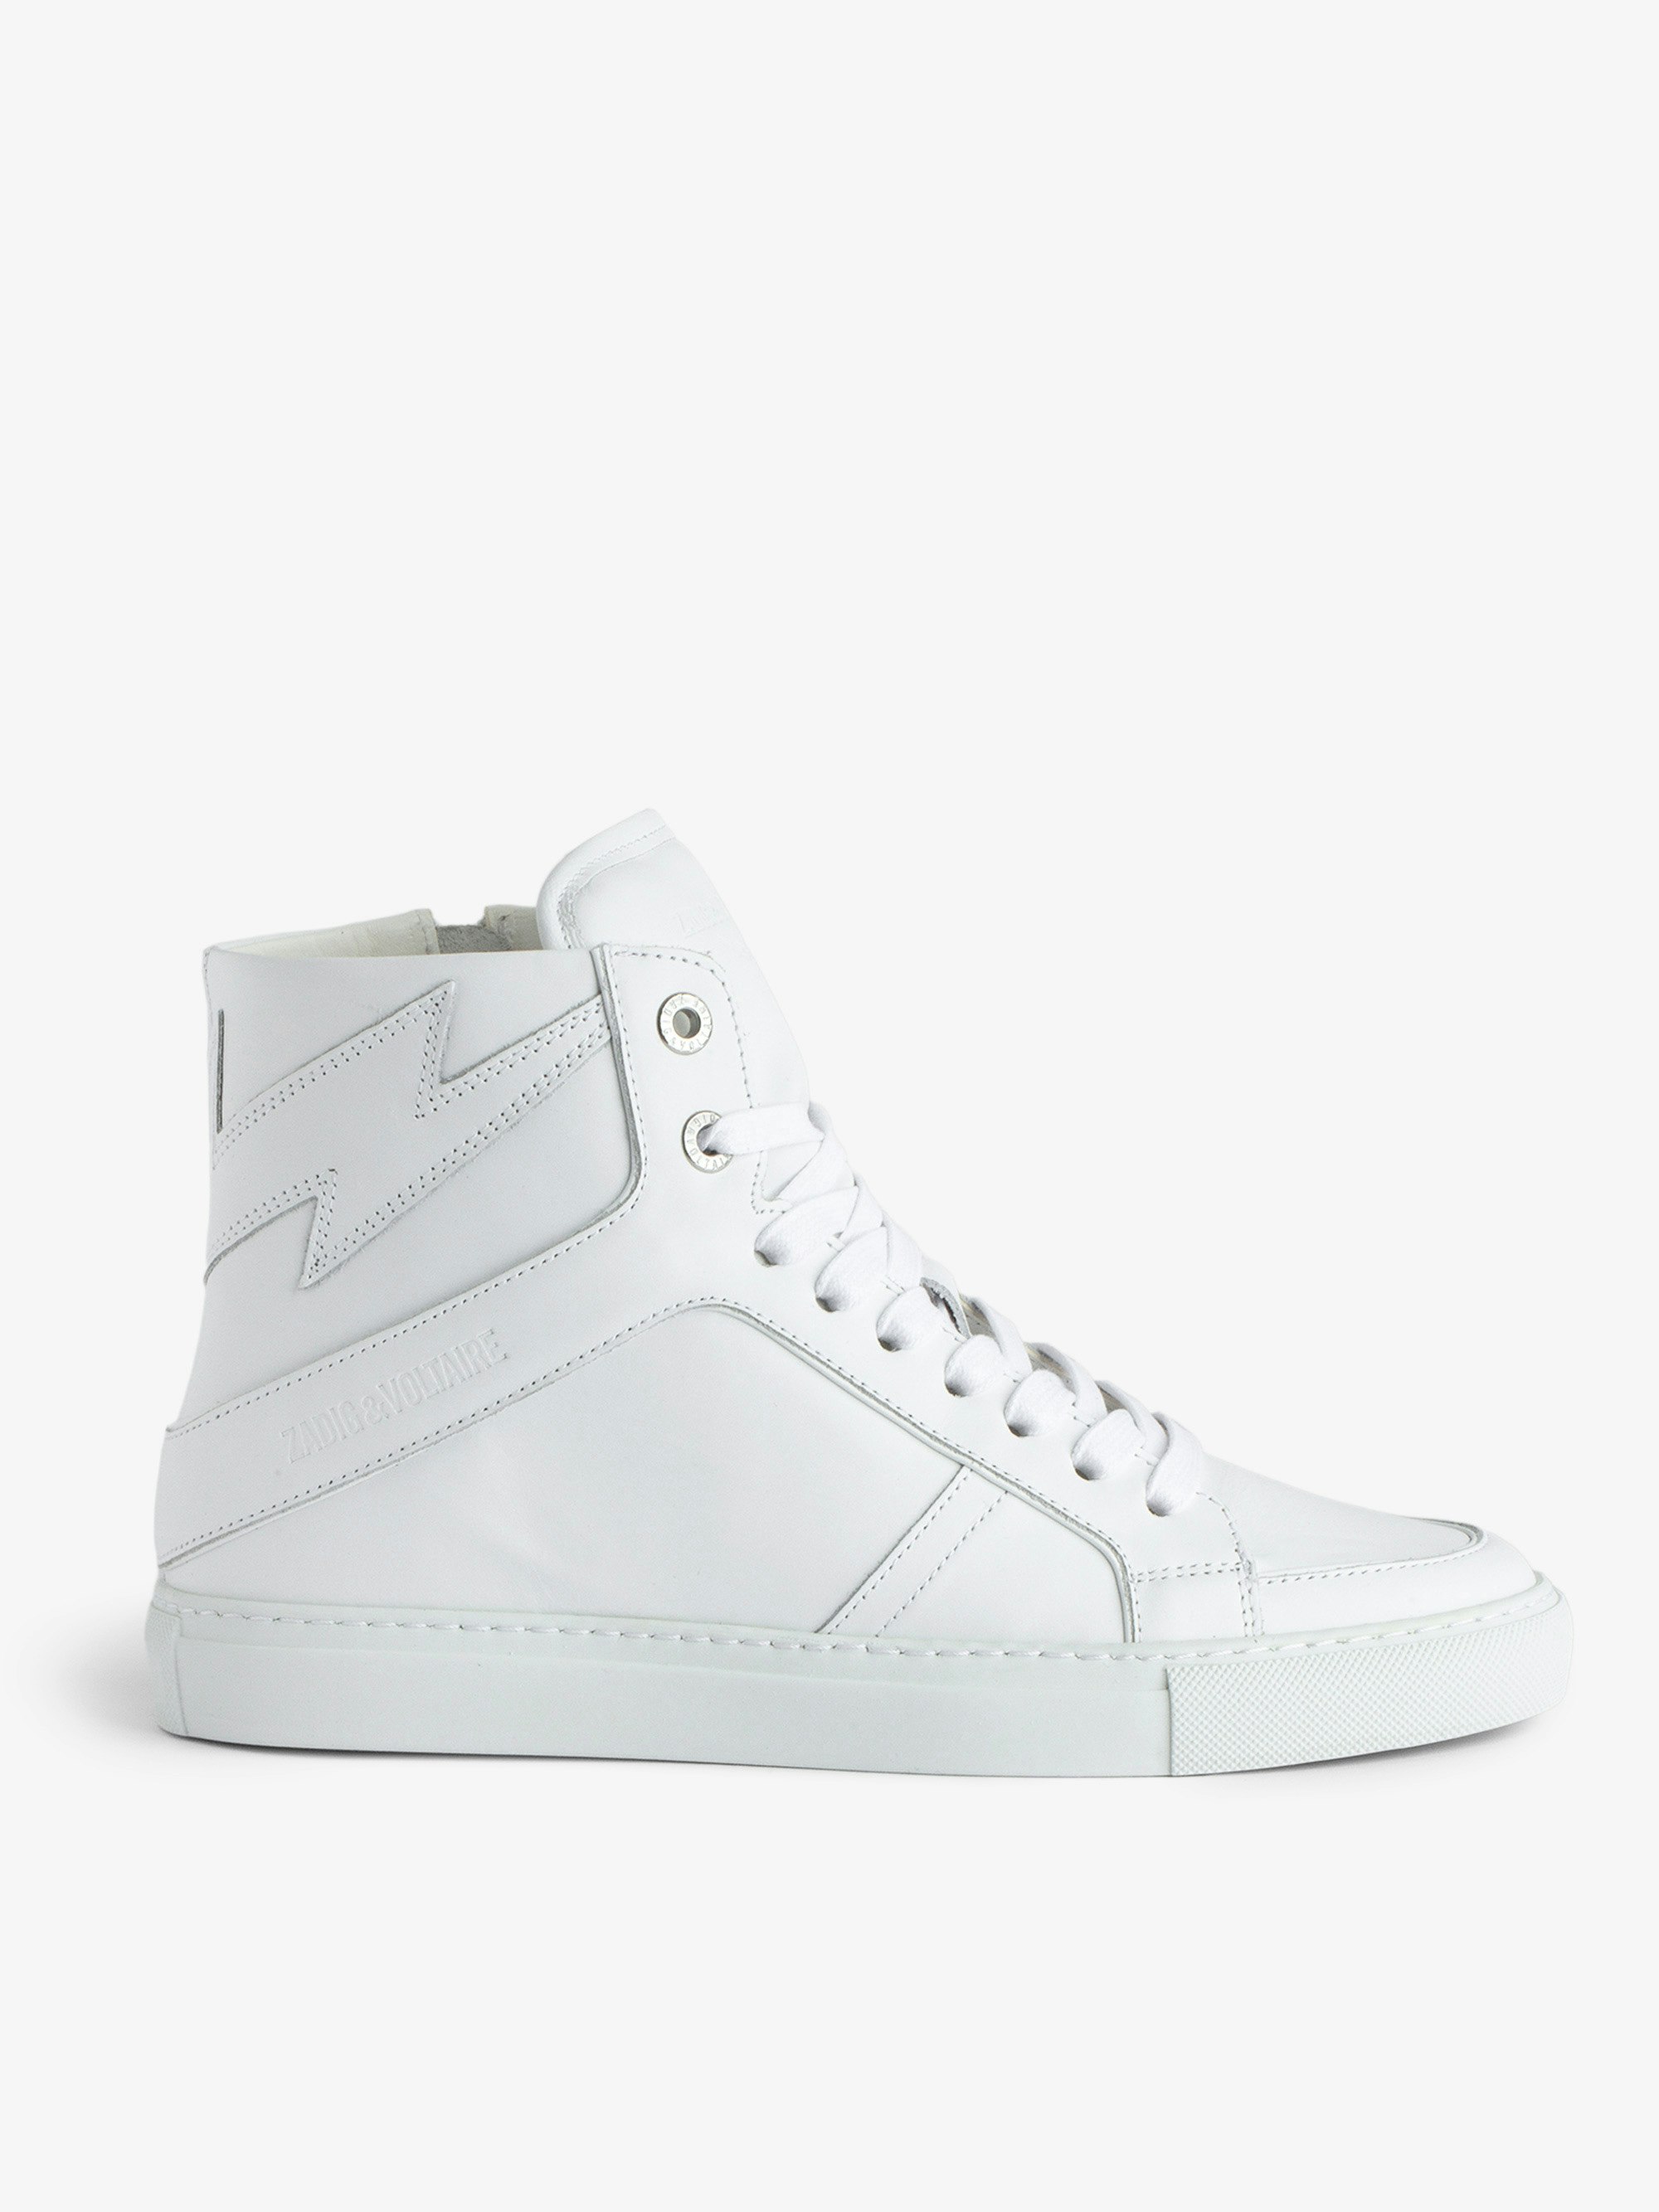 ZV1747 High Flash High-Top Trainers - Women’s high-top trainers ZV1747 in smooth white leather.